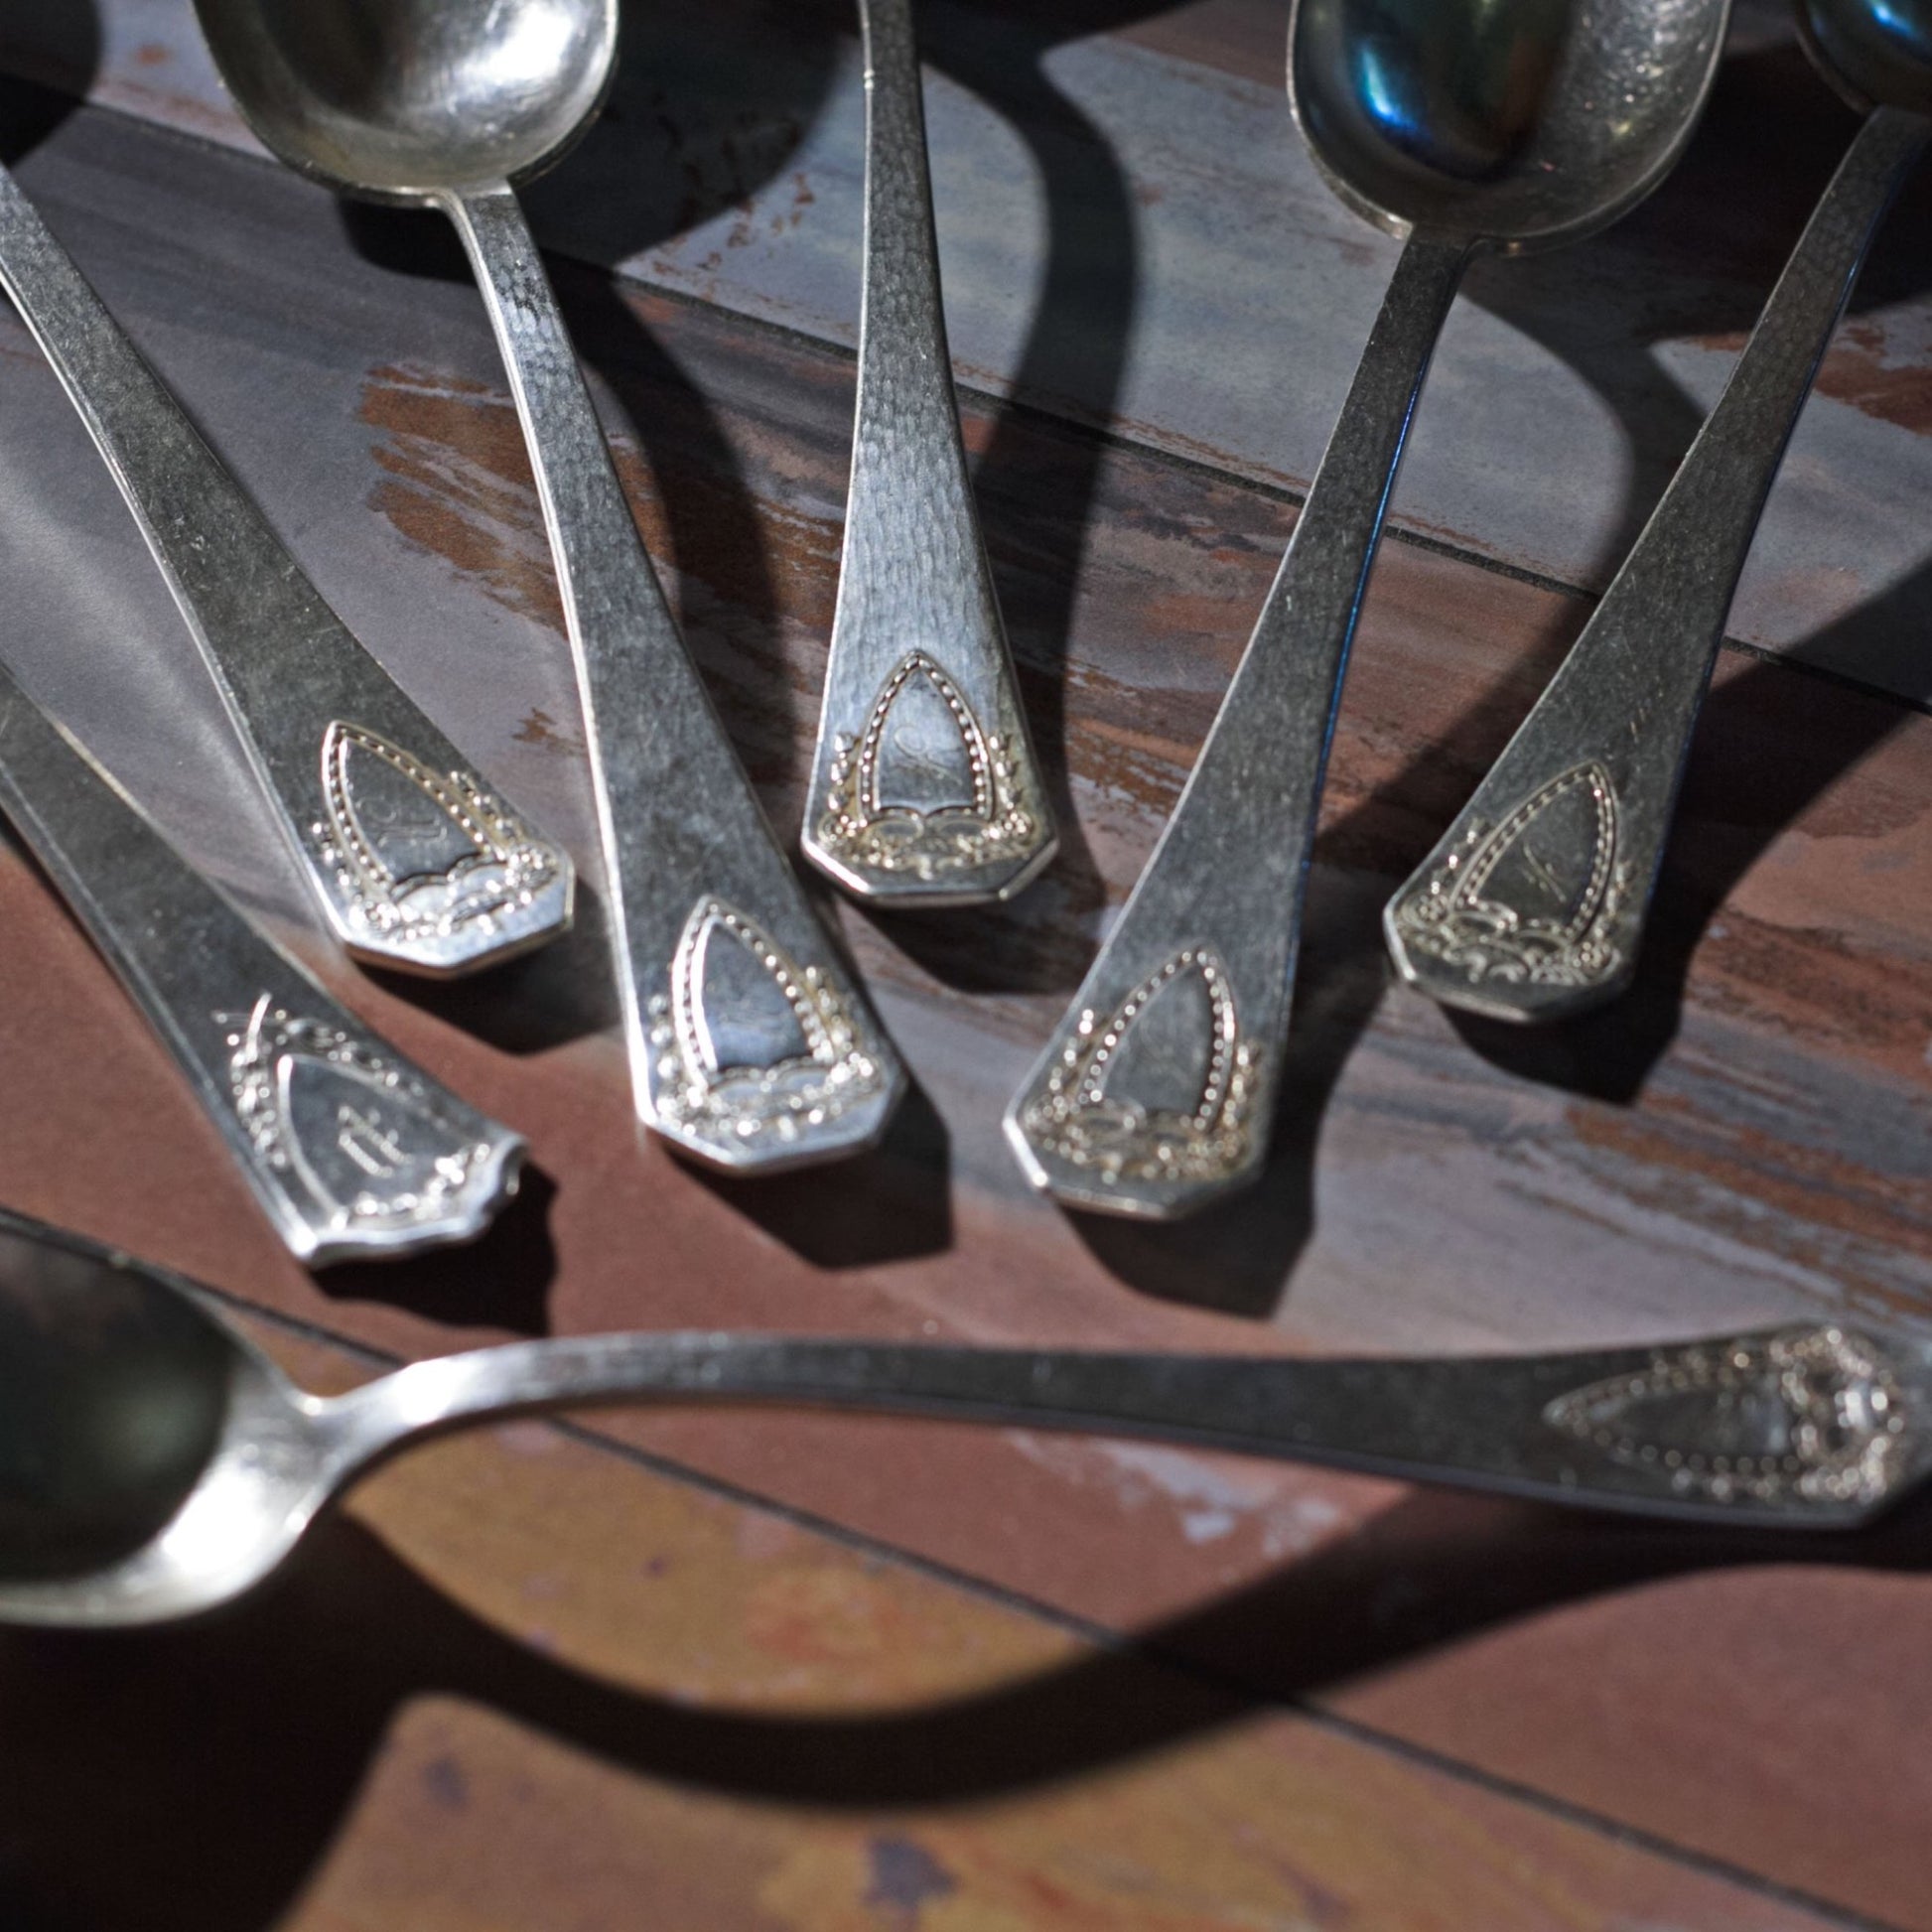 HERALDIC SILVER PLATE SERVING SPOONS by Rogers Brothers Set of Six (6)